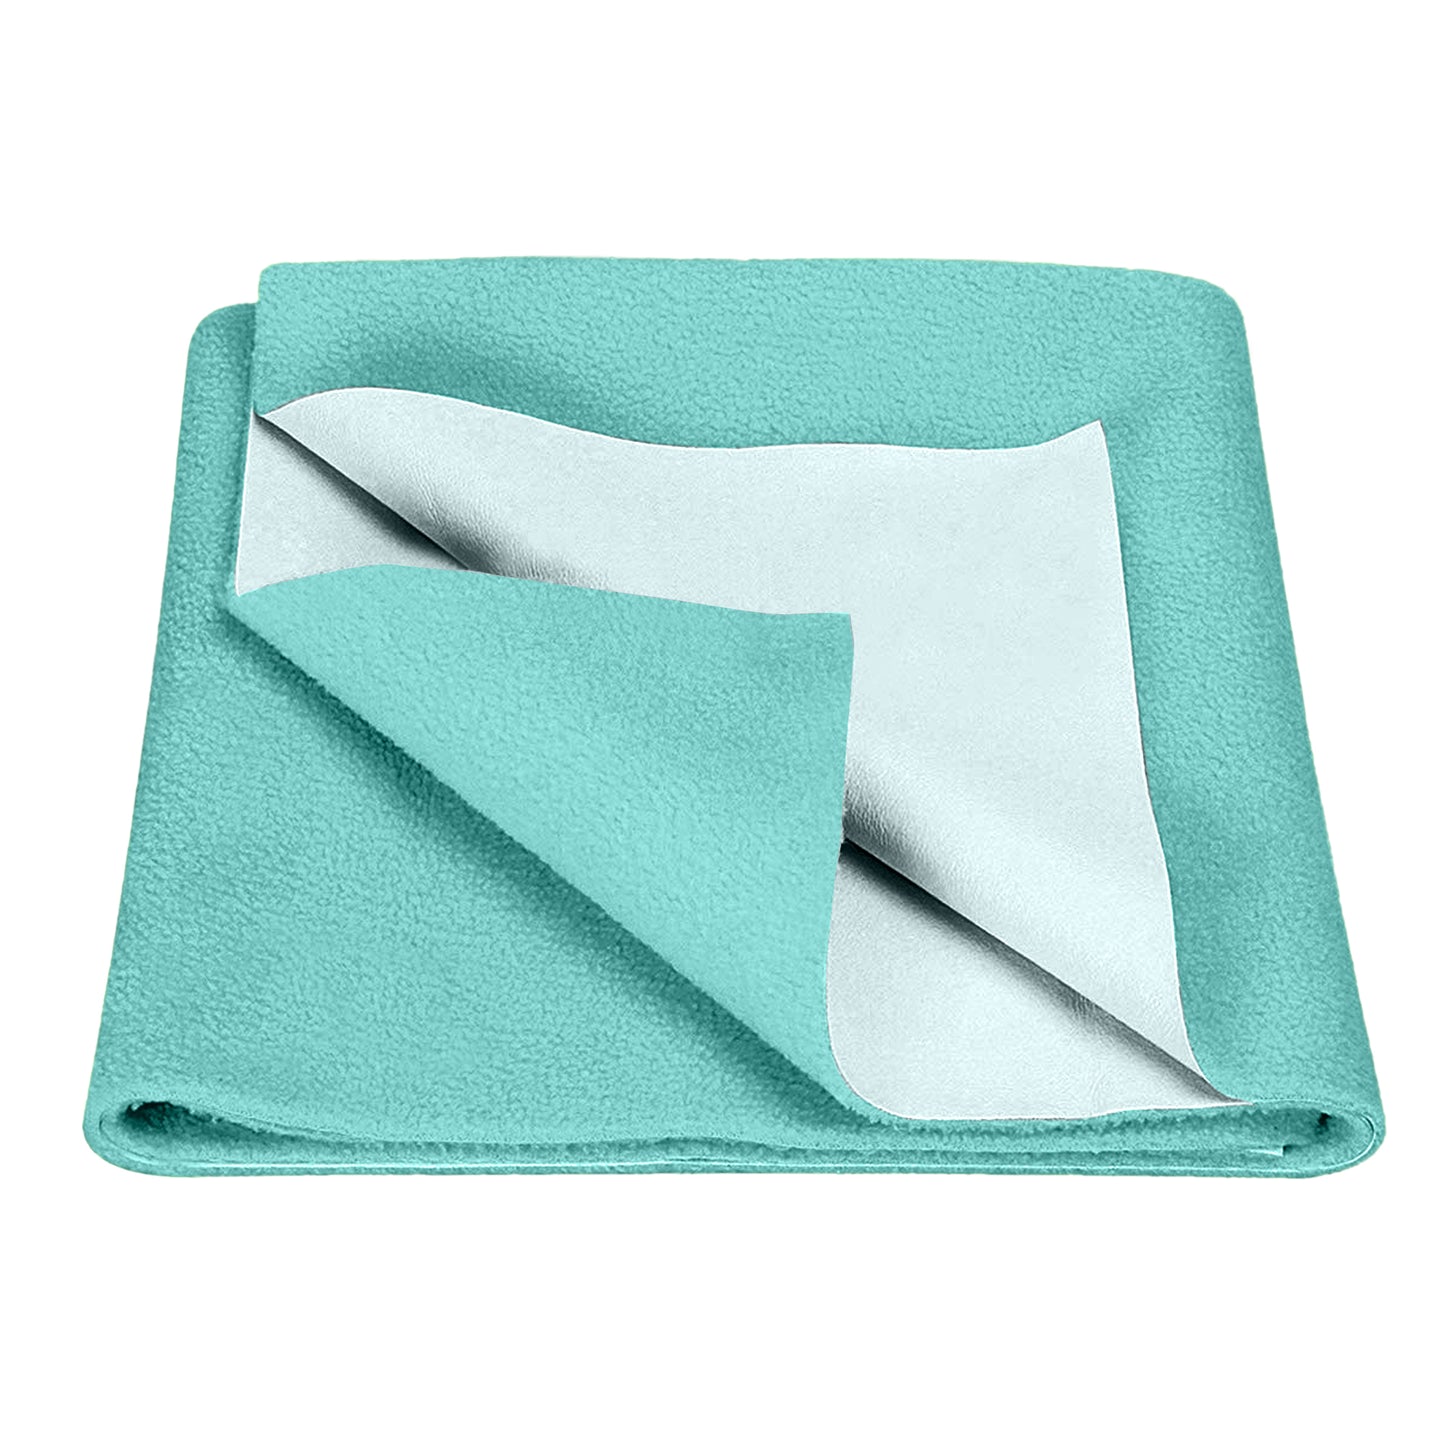 Waterproof Bed Protector, Quick Dry Sheet, Baby Bed Protector, Medium Size(70 X 100 CM), Pack of 1 -BABY BLUE